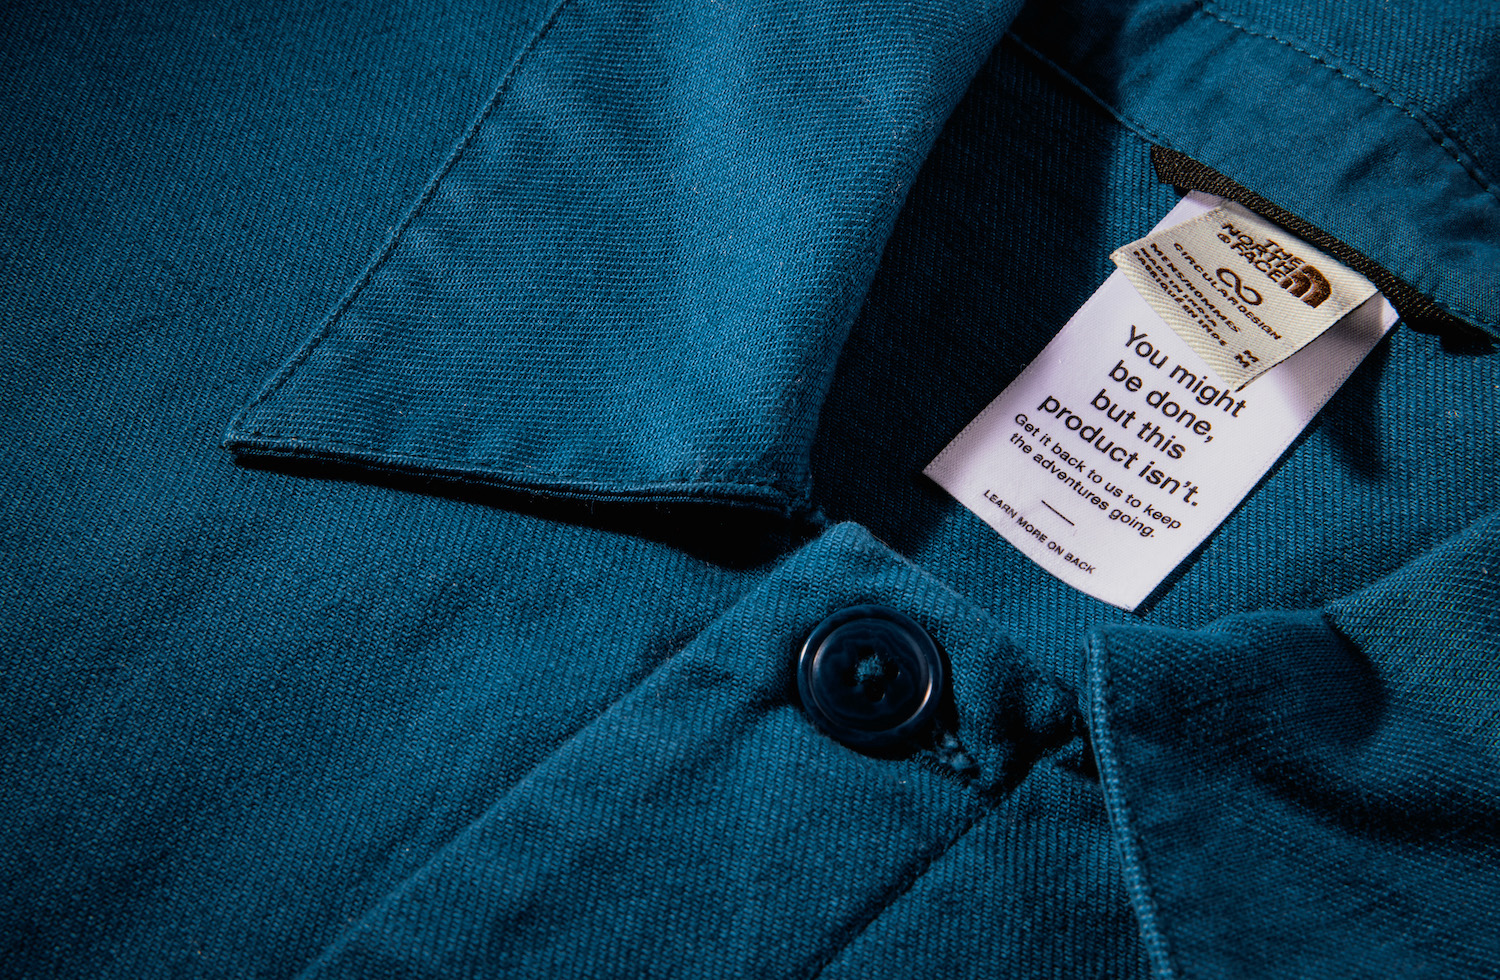 A clothing tag on The North Face's circular design line encouraging consumers to return the product when they're done using it.